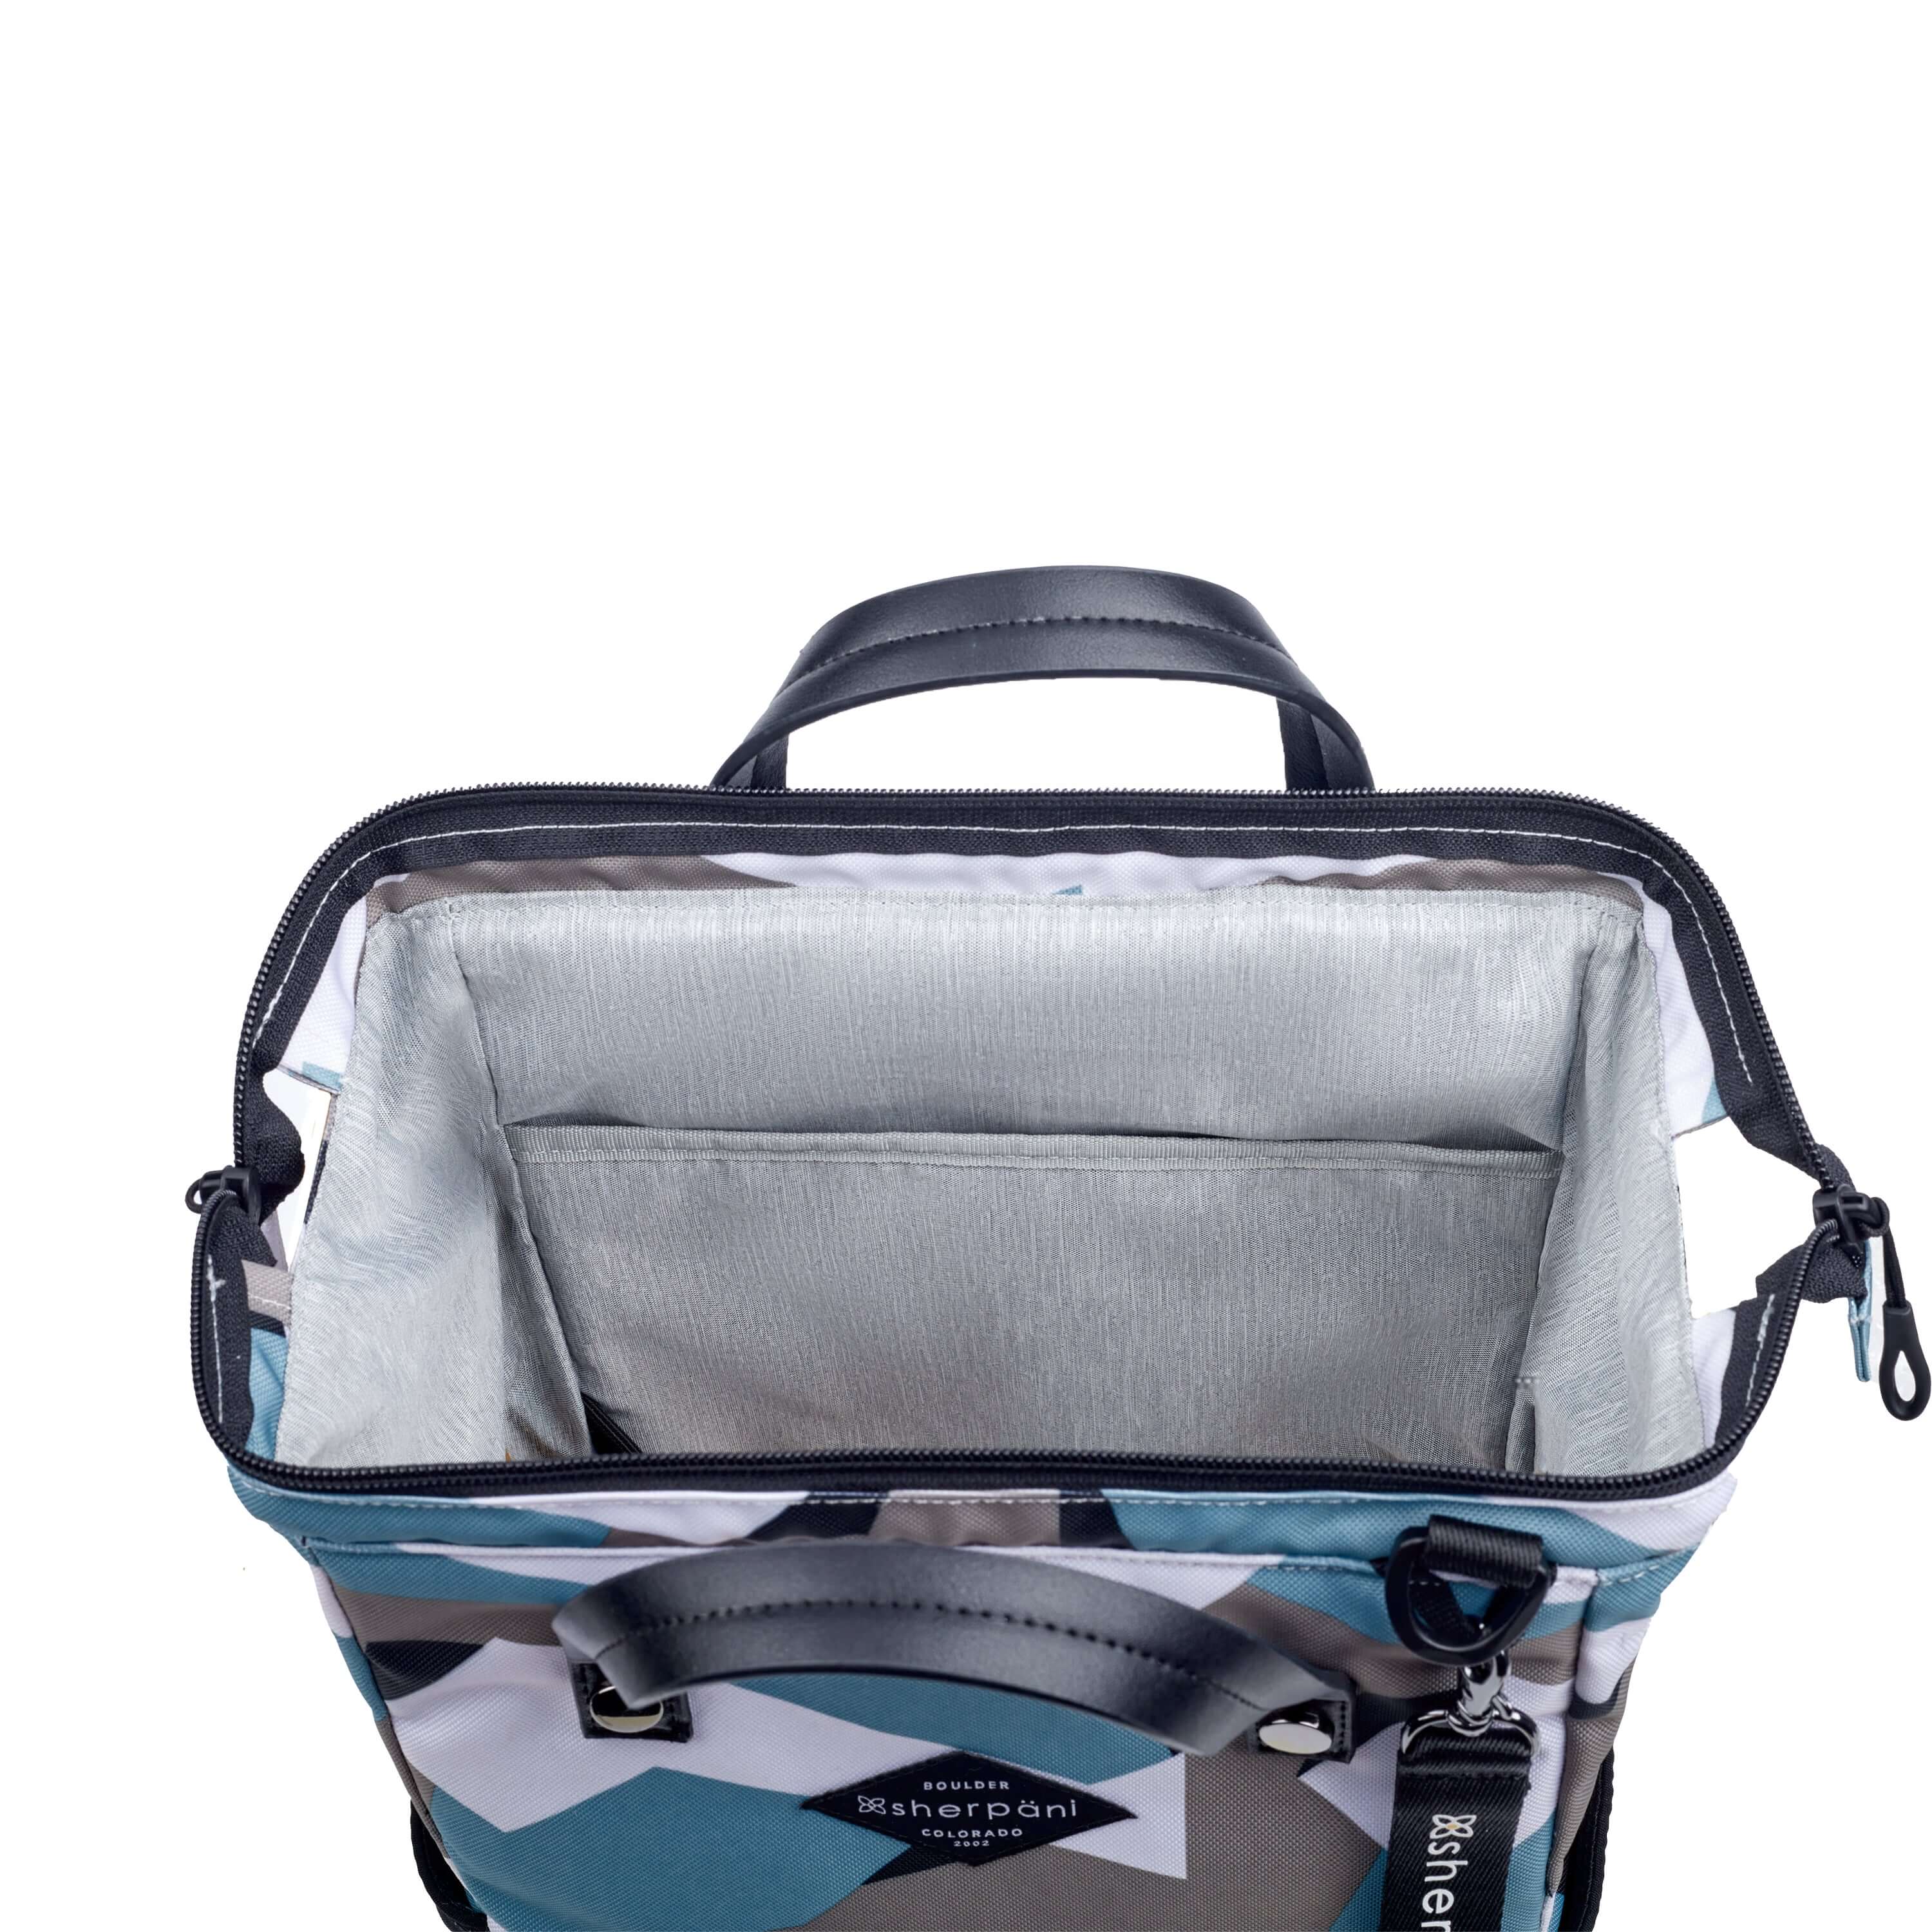 Top view of Sherpani three in one bag, the Dispatch in Summer Camo. The main zipper compartment is open to reveal a doctor bag style opening with a rectangular metal frame. The inside of the bag is light gray and features an internal pouch. 